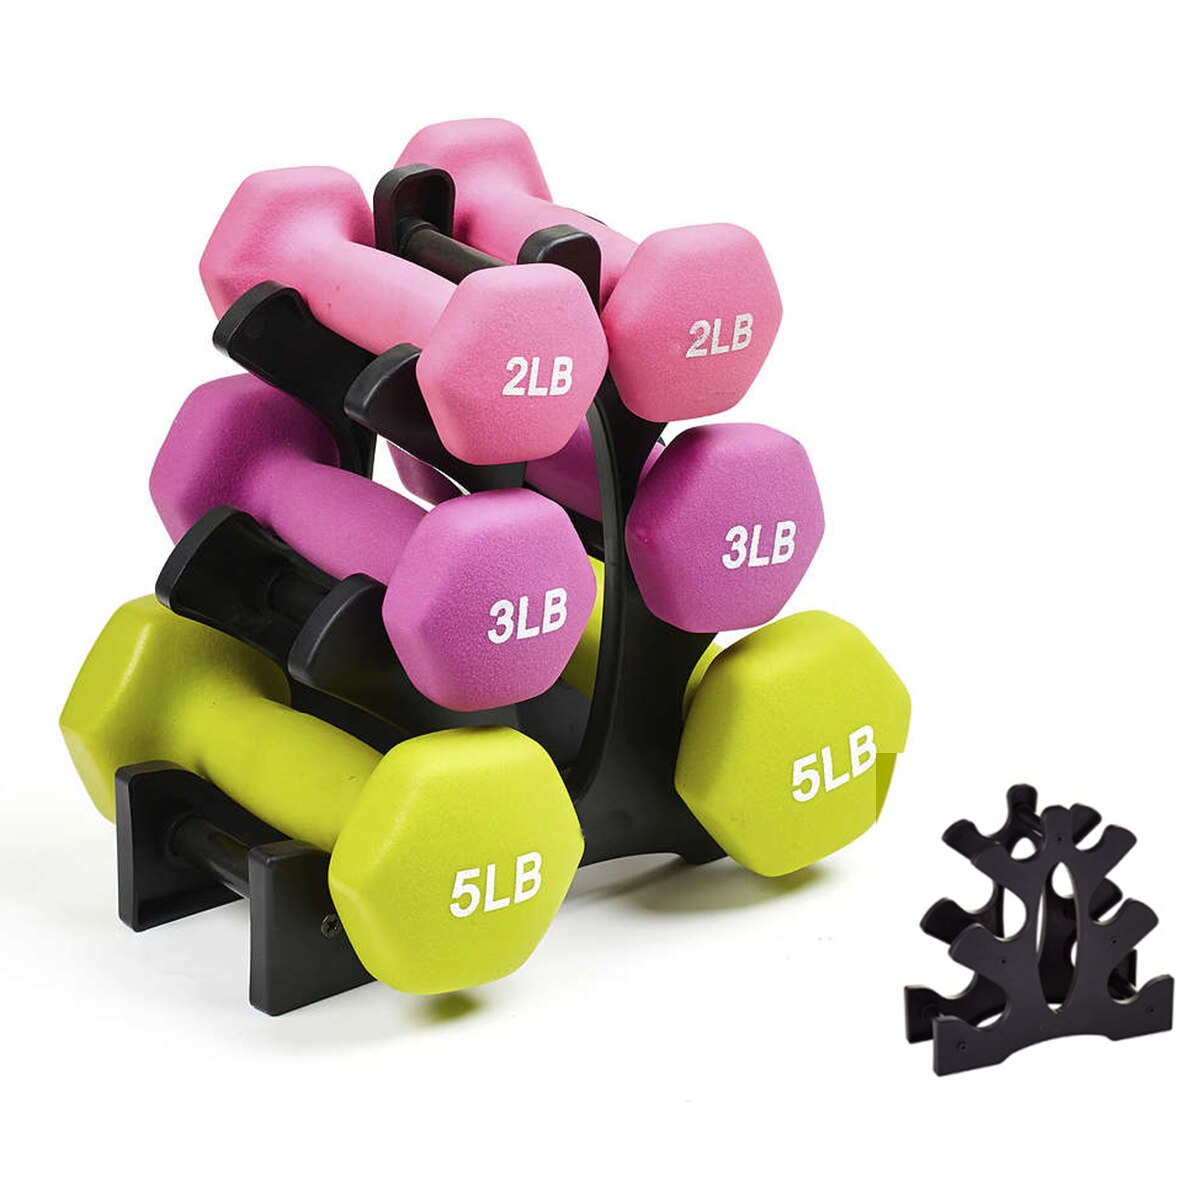 Dumbbell Storage Rack Stand 3-layer Hand-held Dumbbell Storage Rack For Home Office Gym Sport Exercise Accessories: Beige